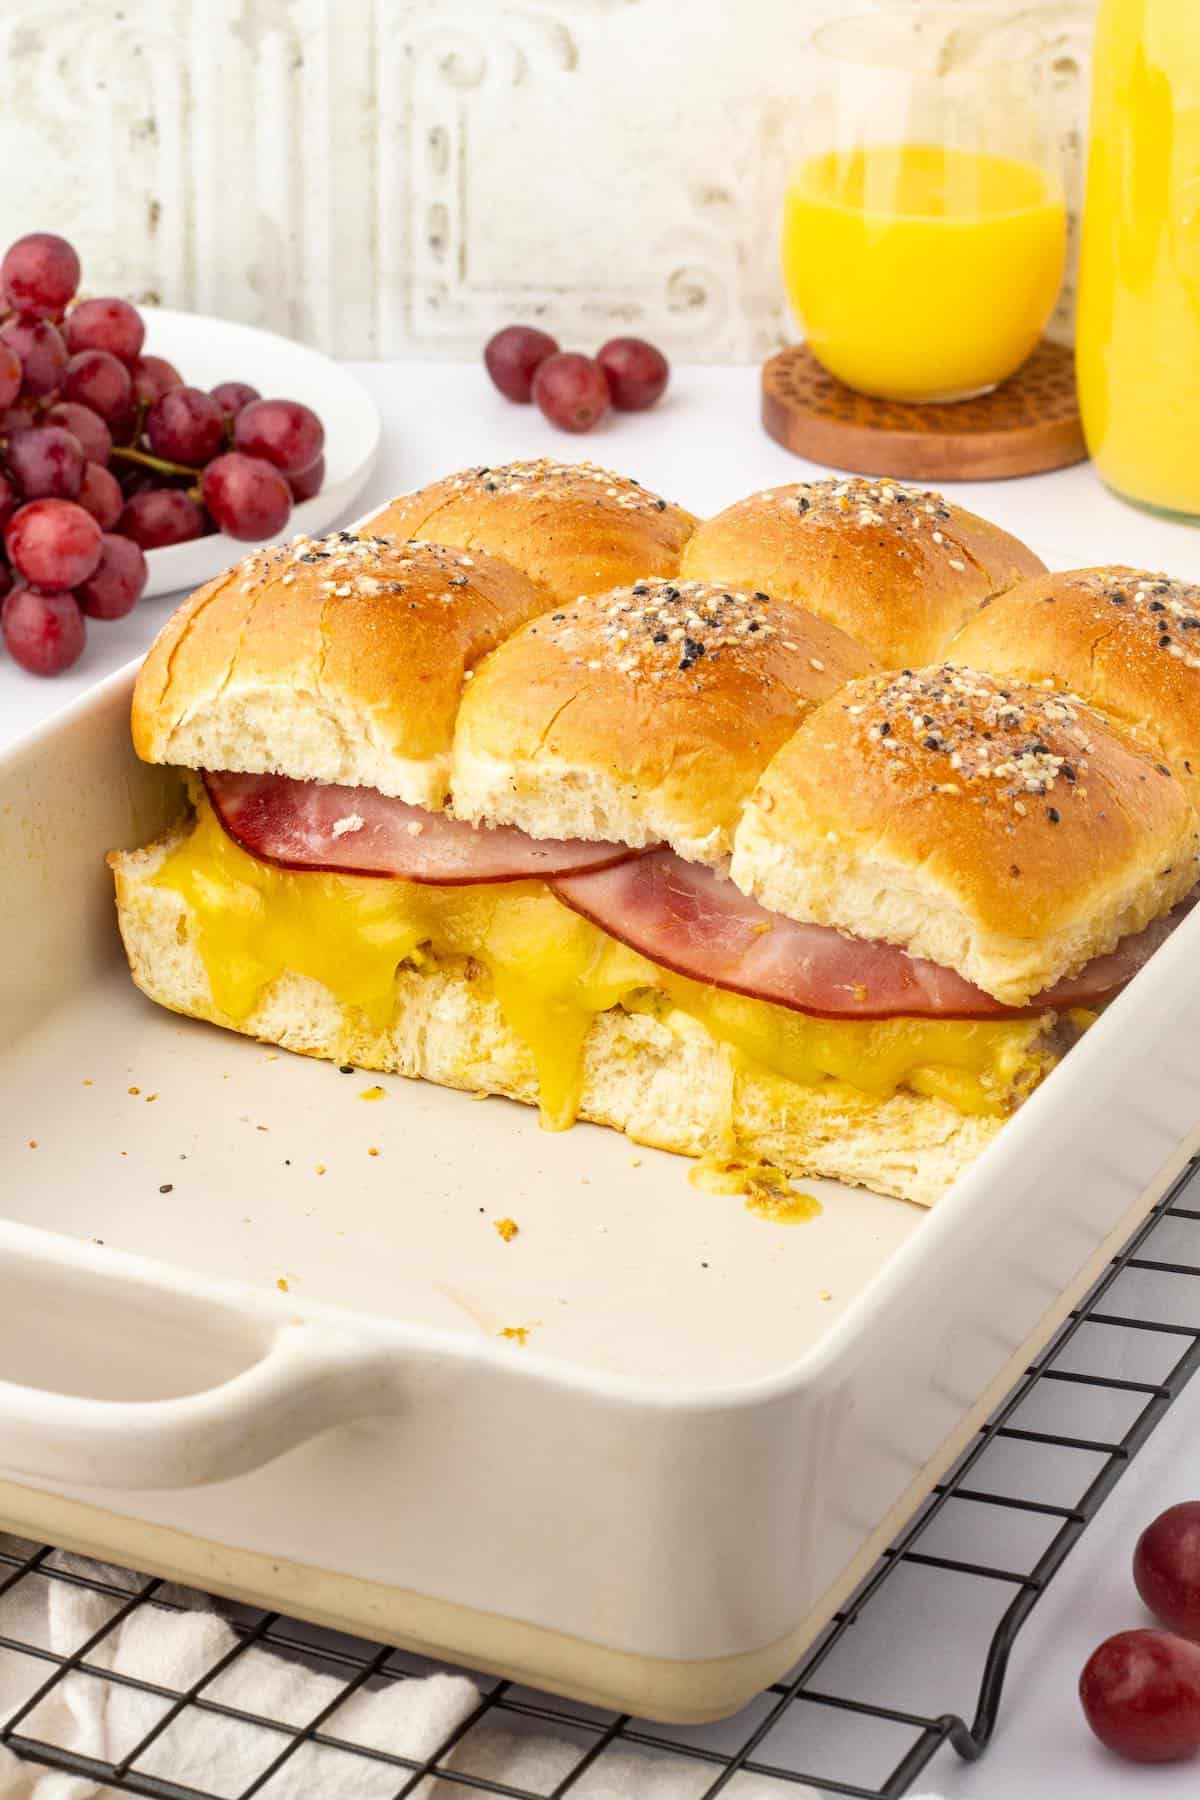 A casserole dish showing ham, cheese and sausage breakfast sliders.